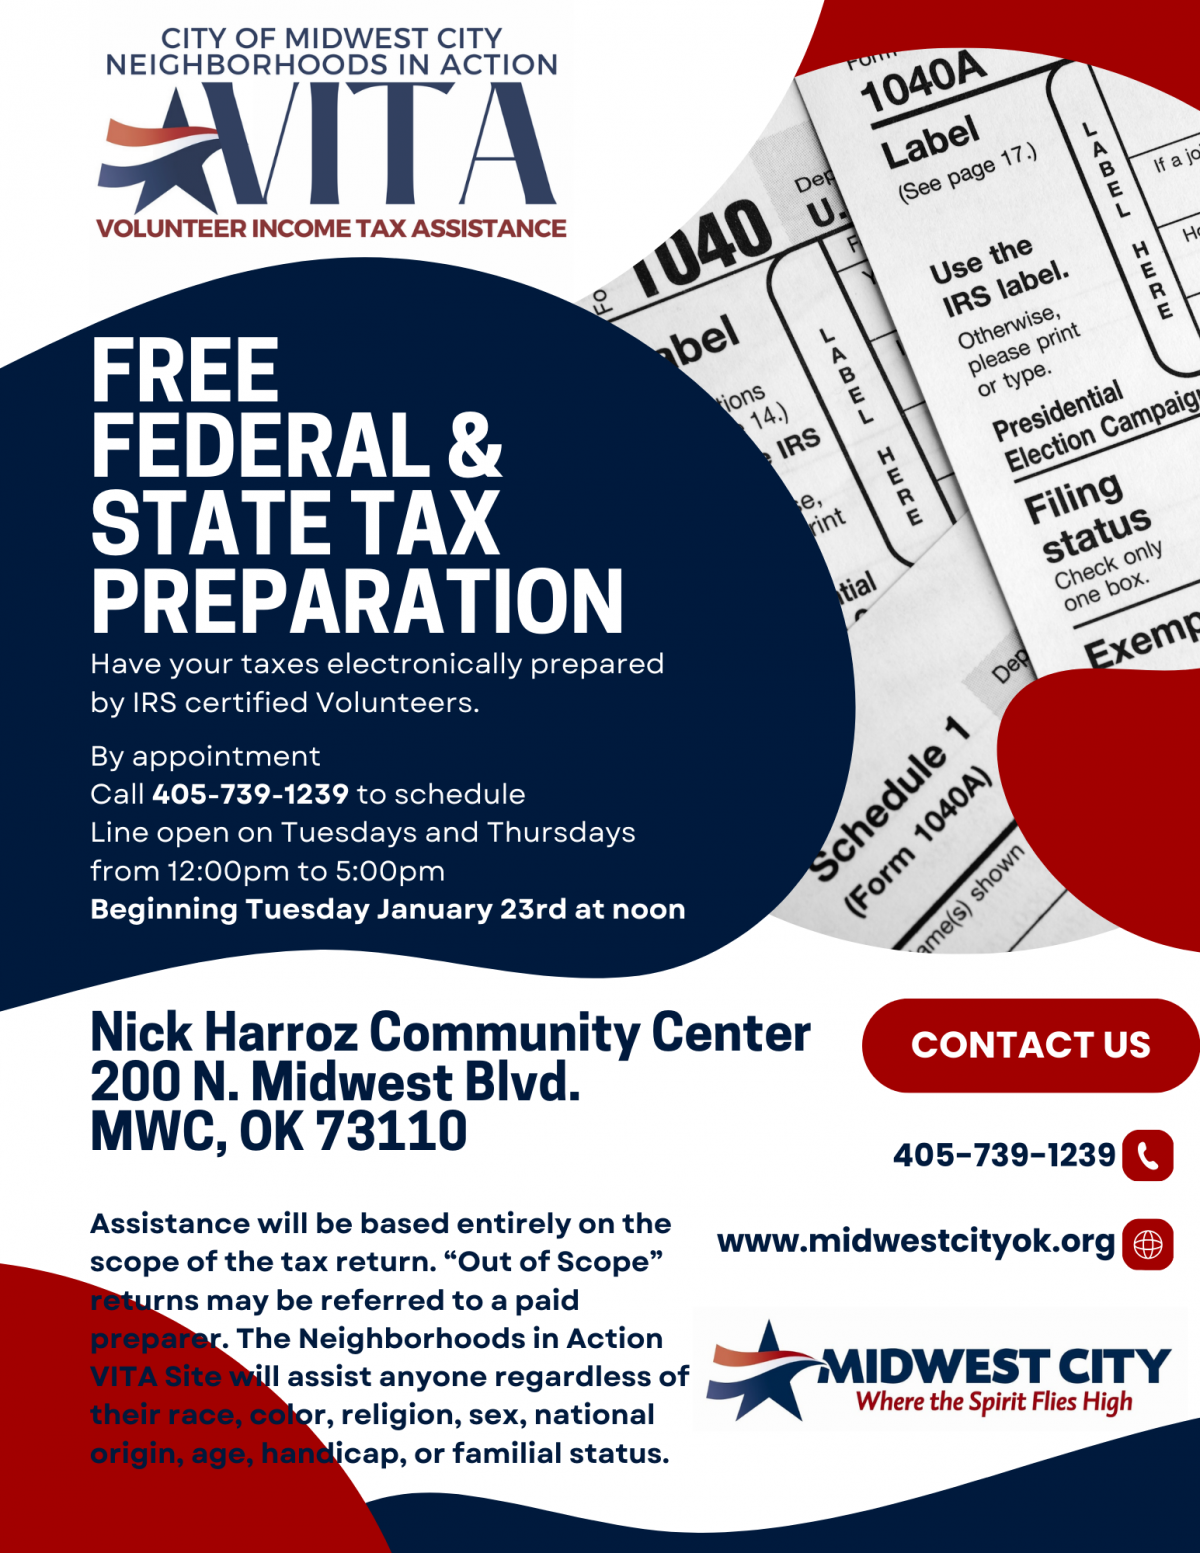 Volunteer Income Tax Assistance free federal and state tax preparation for appointment call 405-739-1239